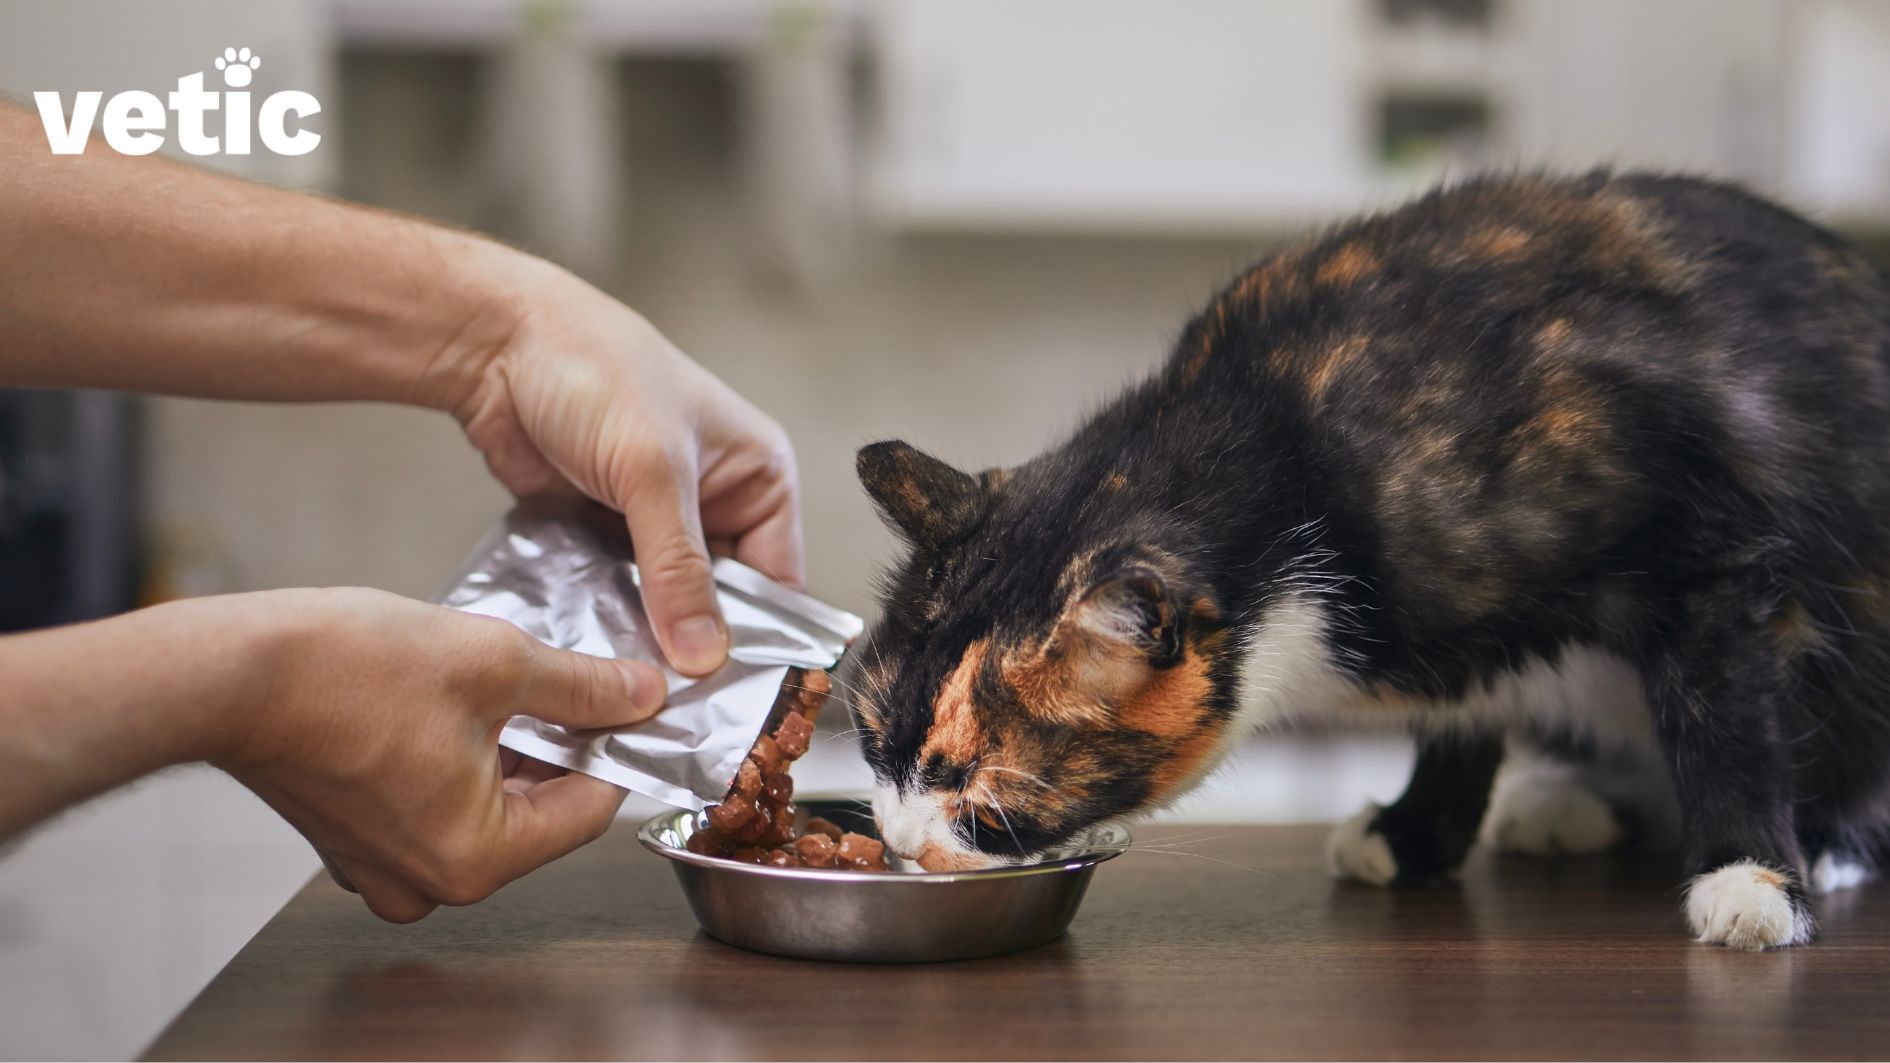 Two hands pouring out wet cat food into a small steel bowl as a calico cat with white paws and a white chest licks the bowl. the bowl is on a wooden table and so is the cat. the cat is on the right and the hands are on the left.